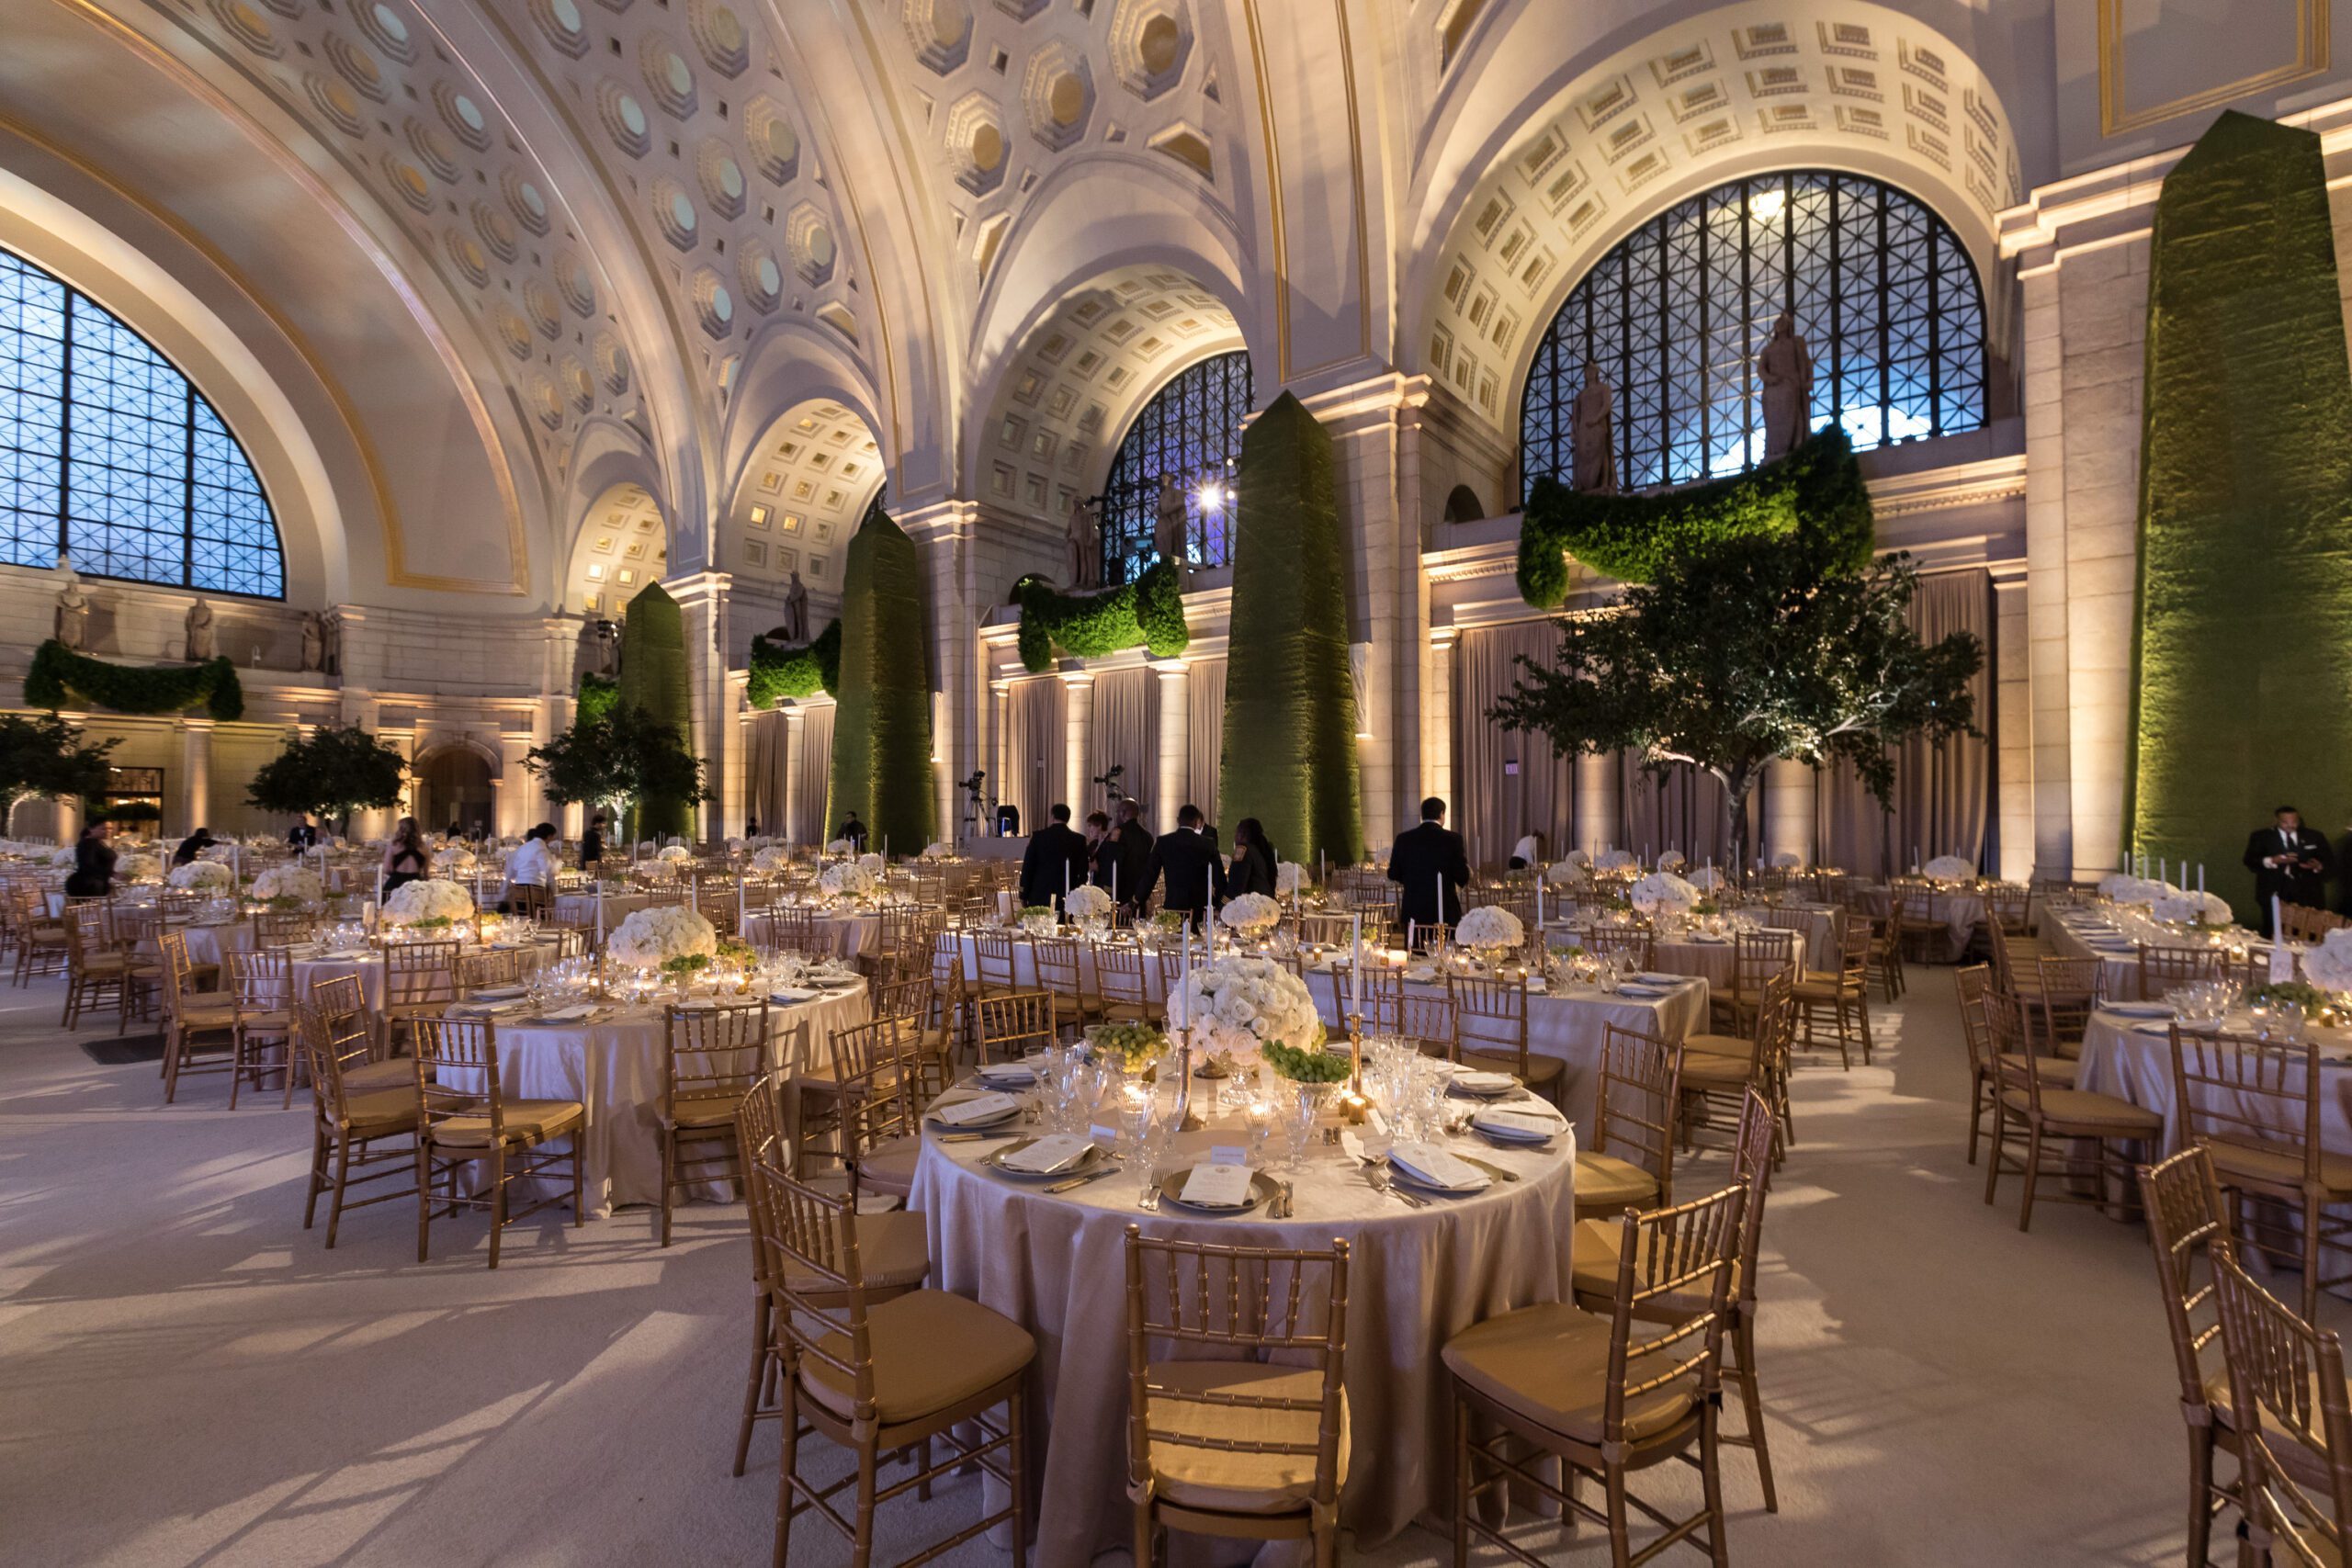 Corporate Event in Main Hall-East with Trees, Hanging Greenery, Floral Centerpieces, and Candlelight.